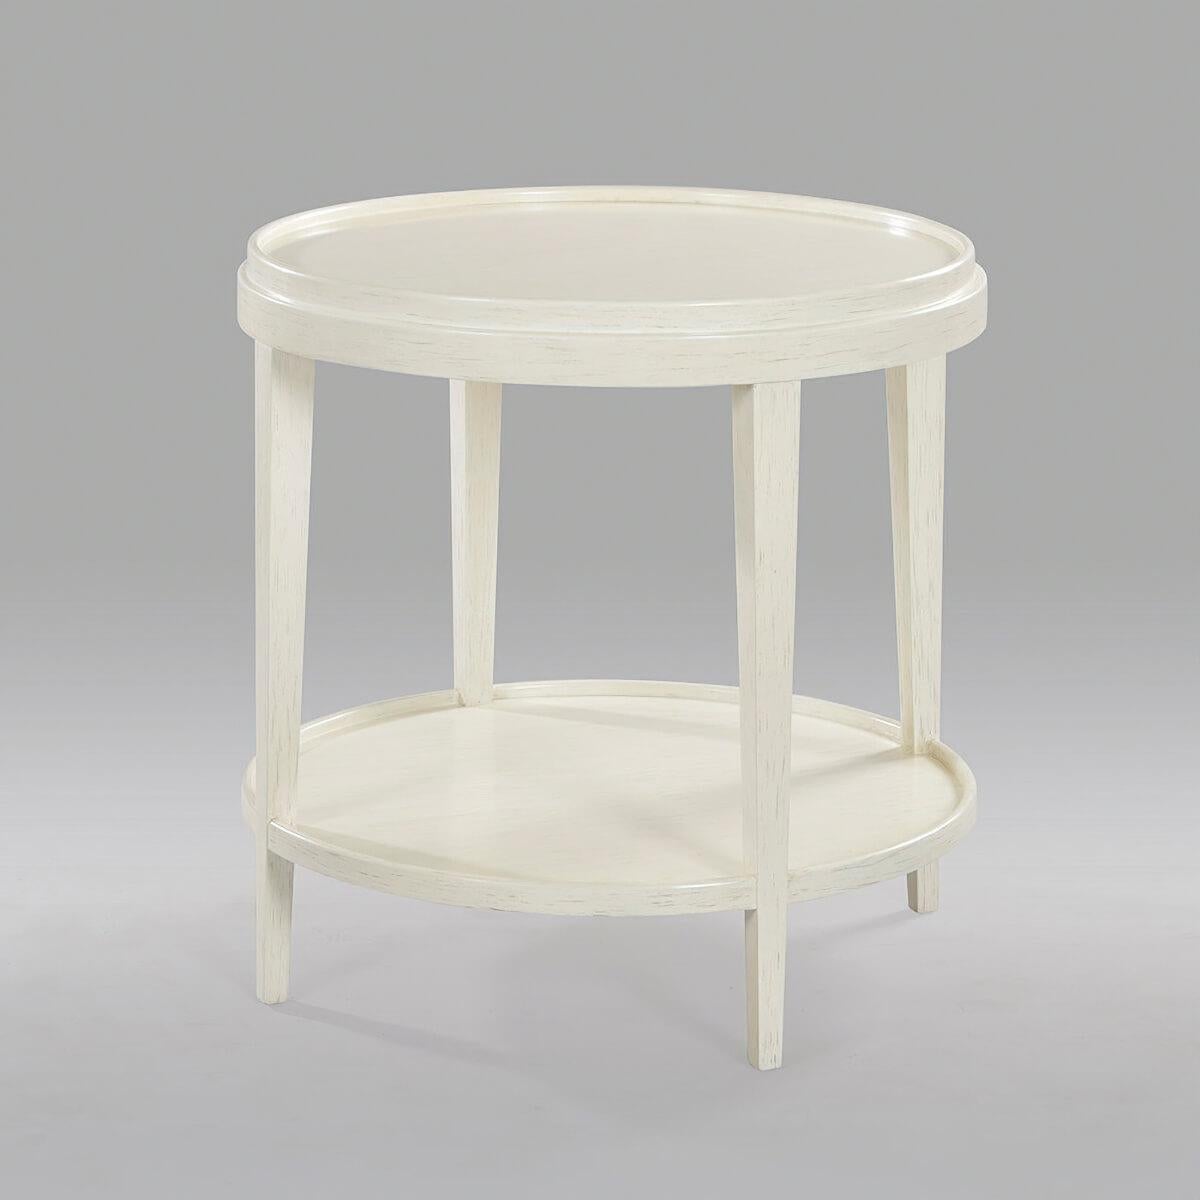 Rustic Small Classic Round End Table, Distressed White For Sale